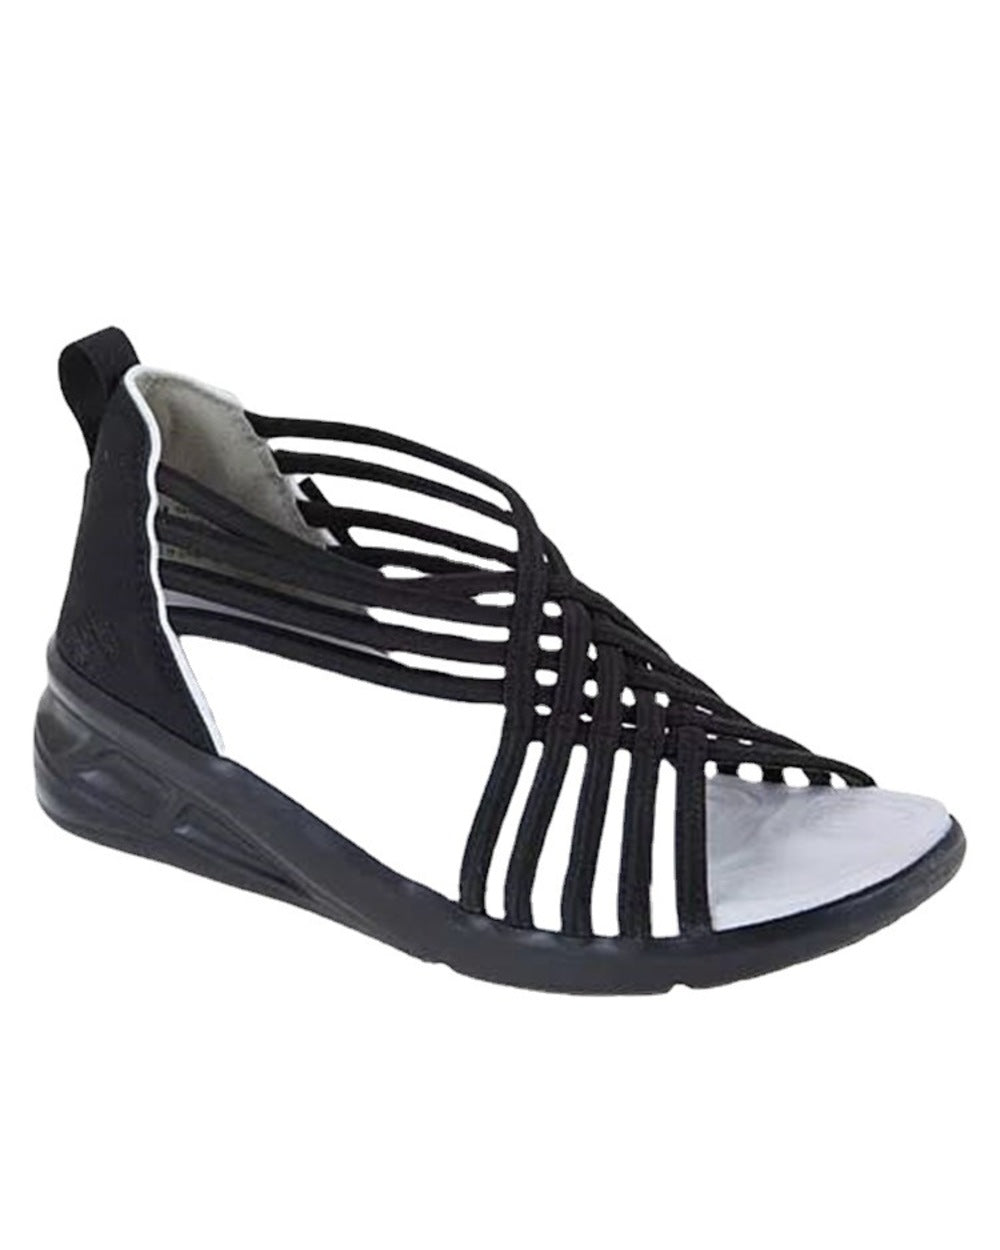 SUMMER SALE -Water-Ready Sporty Step-In Sandal